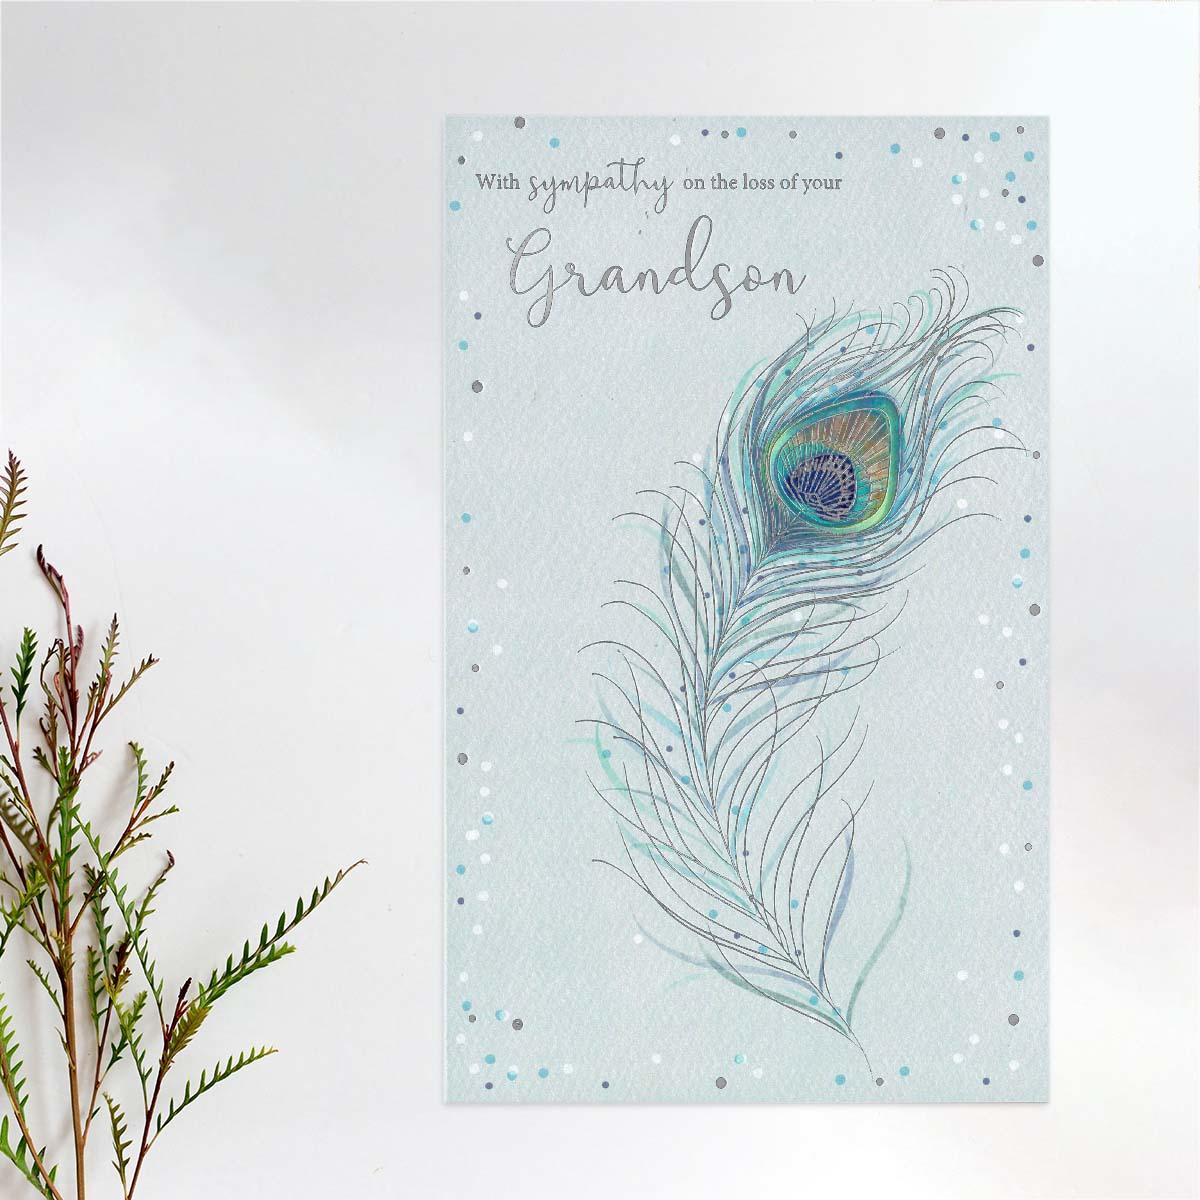 Sympathy - Loss Of Grandson Card Front Image